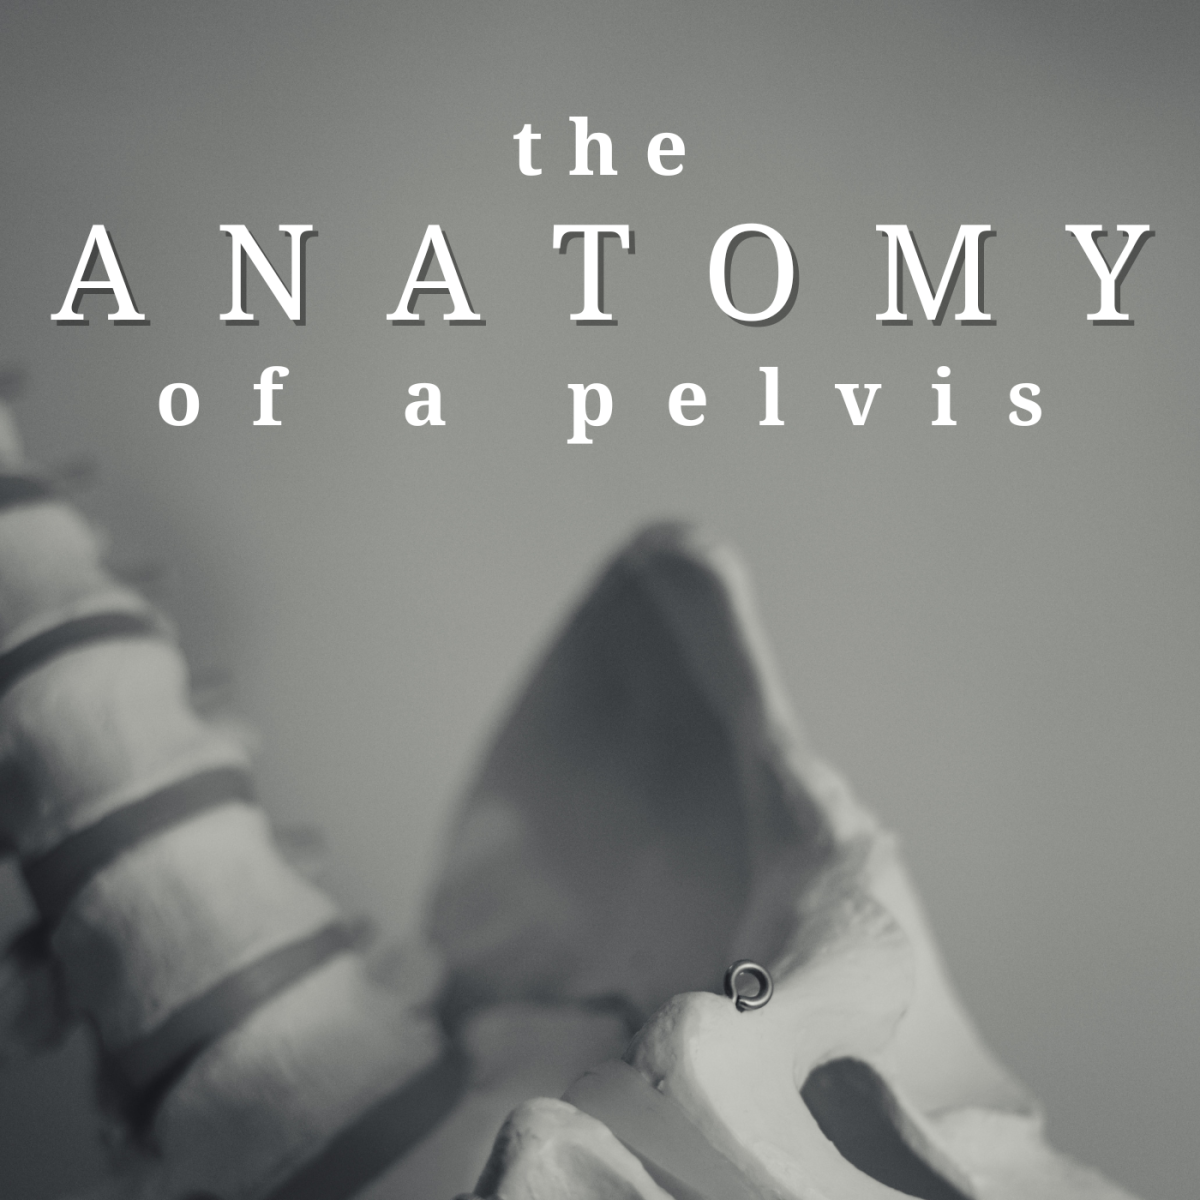 All about the pelvis